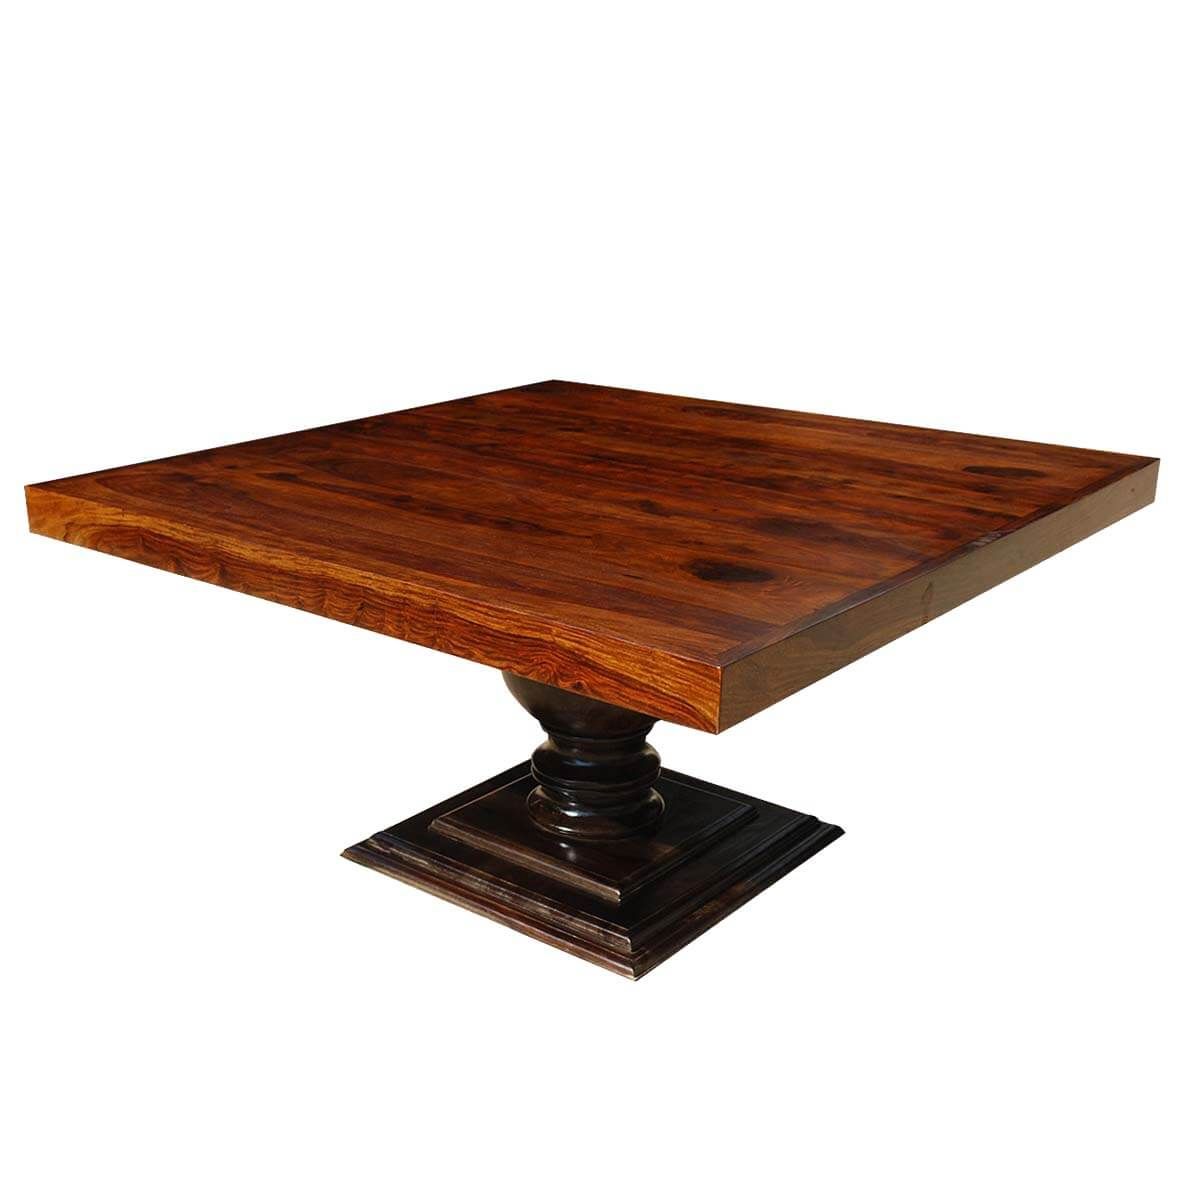 Minneapolis Rustic Solid Wood Fusion Pedestal Square Intended For Most Recently Released Sevinc Pedestal Dining Tables (View 12 of 15)